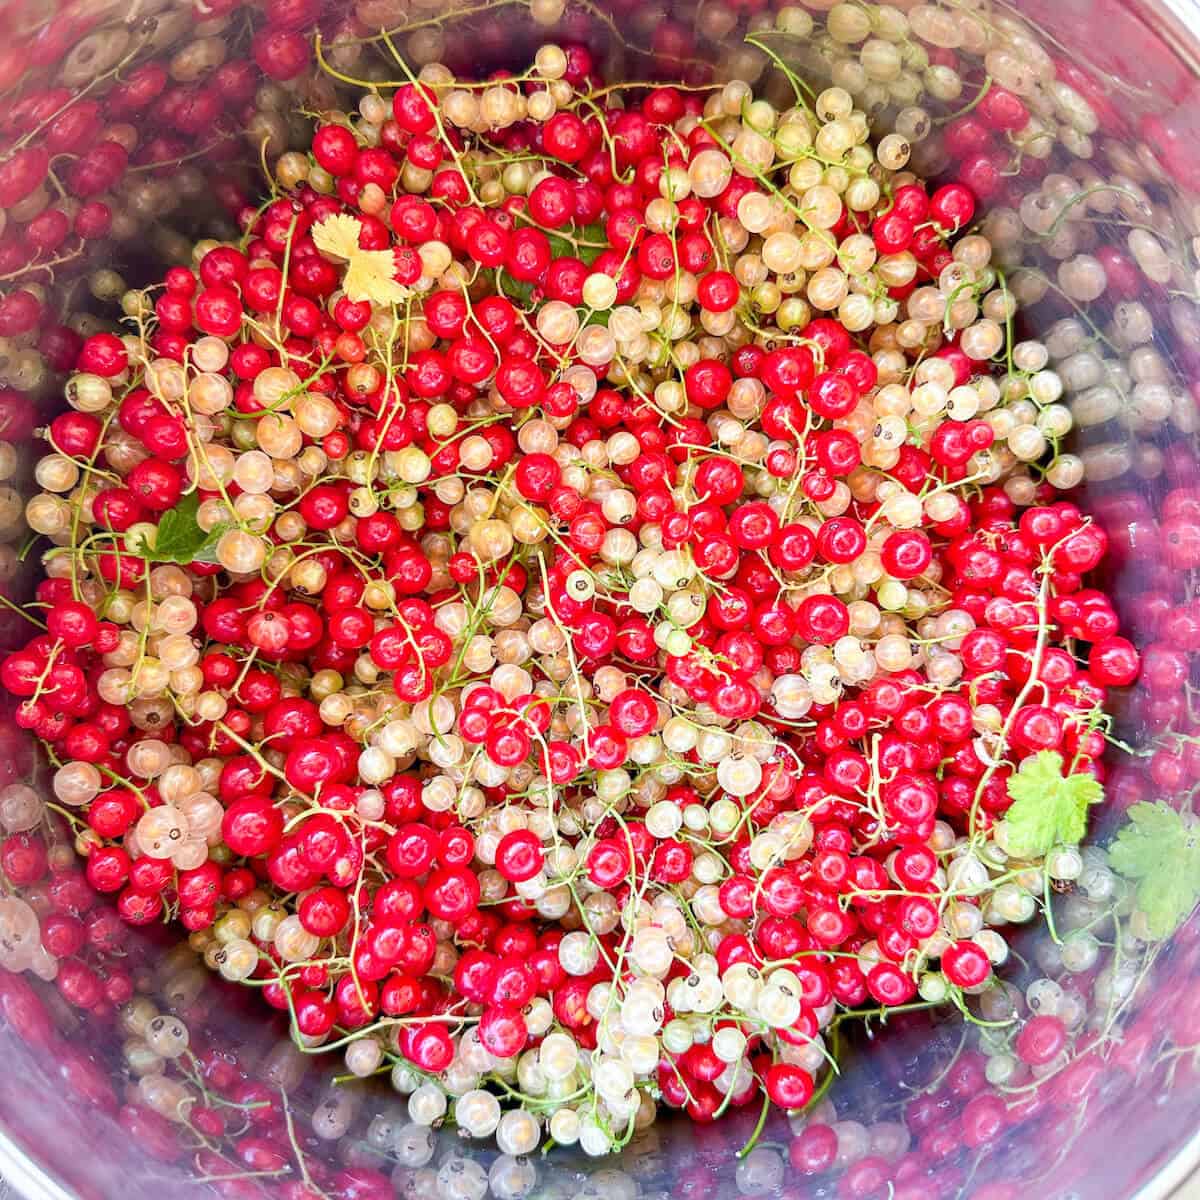 A saucepan full of red currants and white currants, shown from above. 